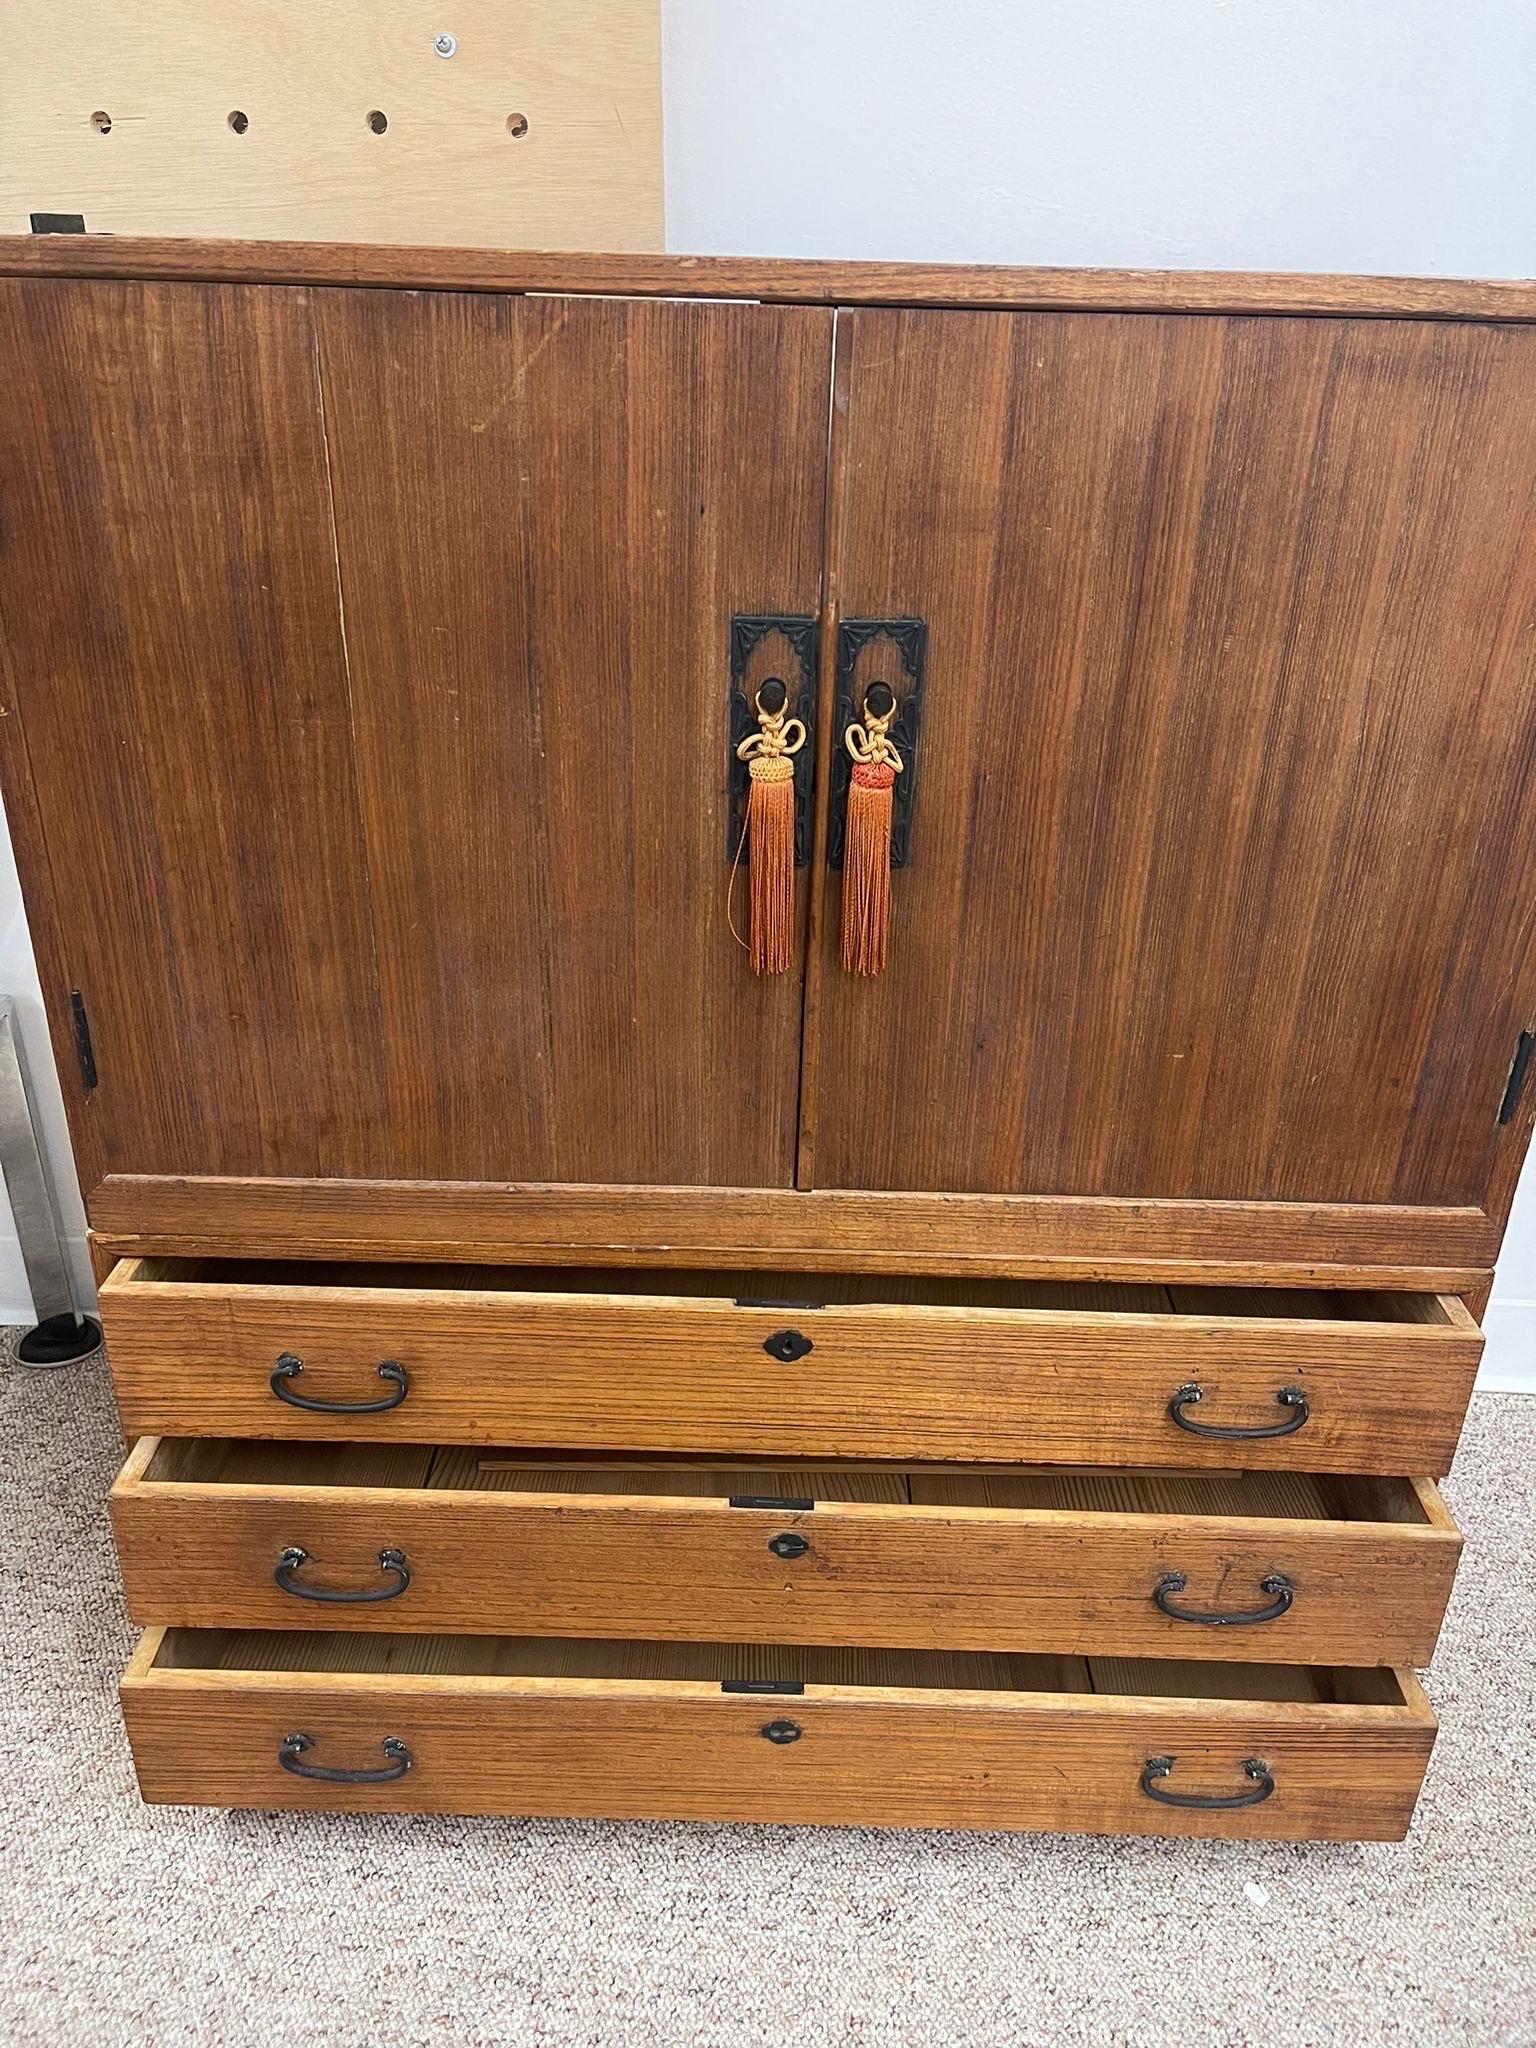 Mid-Century Modern Vintage Tansu Cabinet With Cabinet on Top and Bottom 3 Drawers.